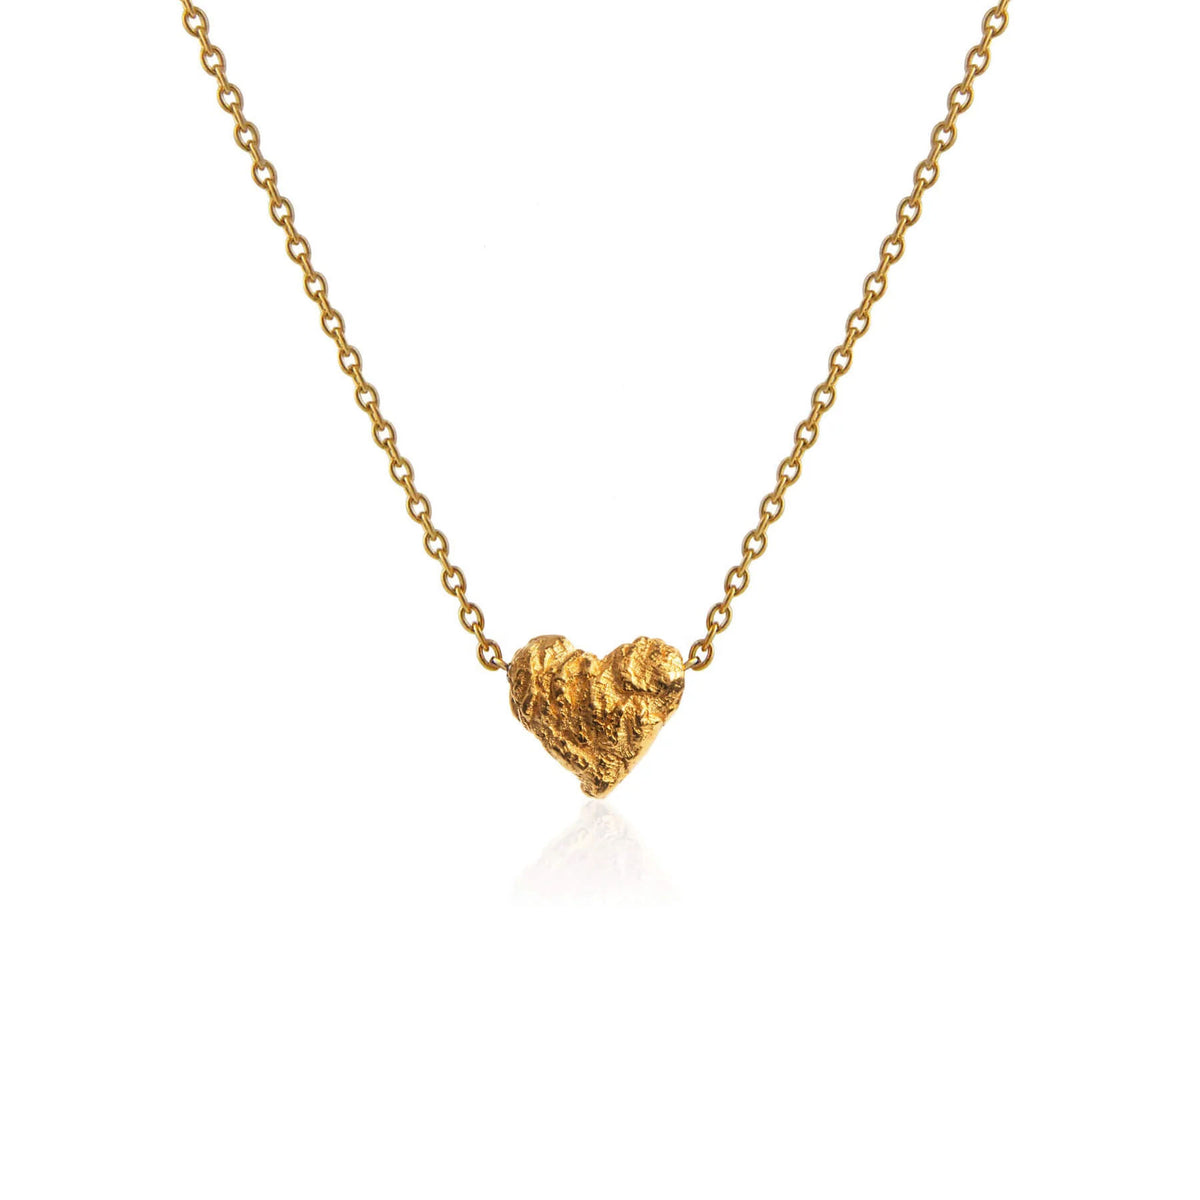 Illusion Heart Shaped Necklace - Boutee